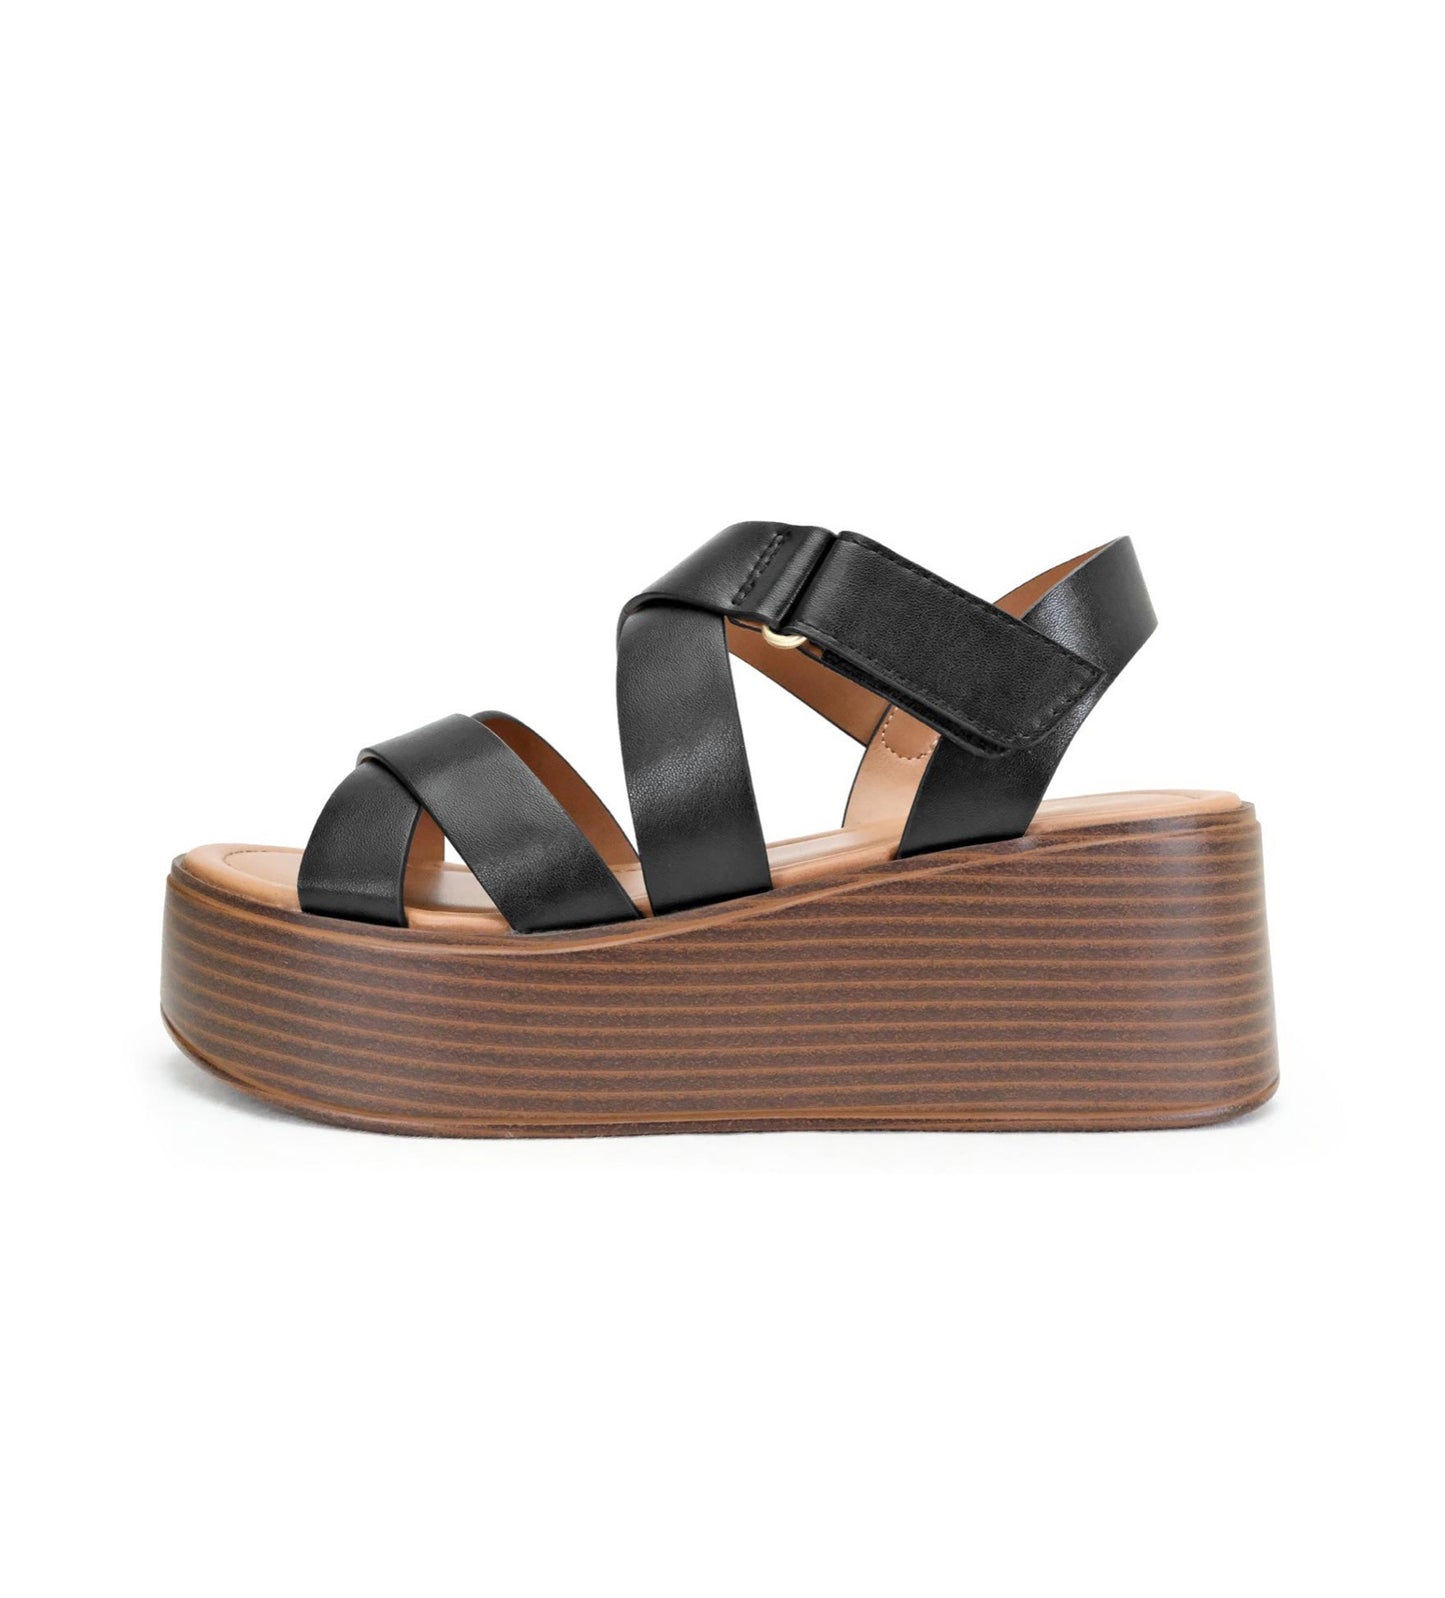 Dough-S Strappy Wedged Sandal